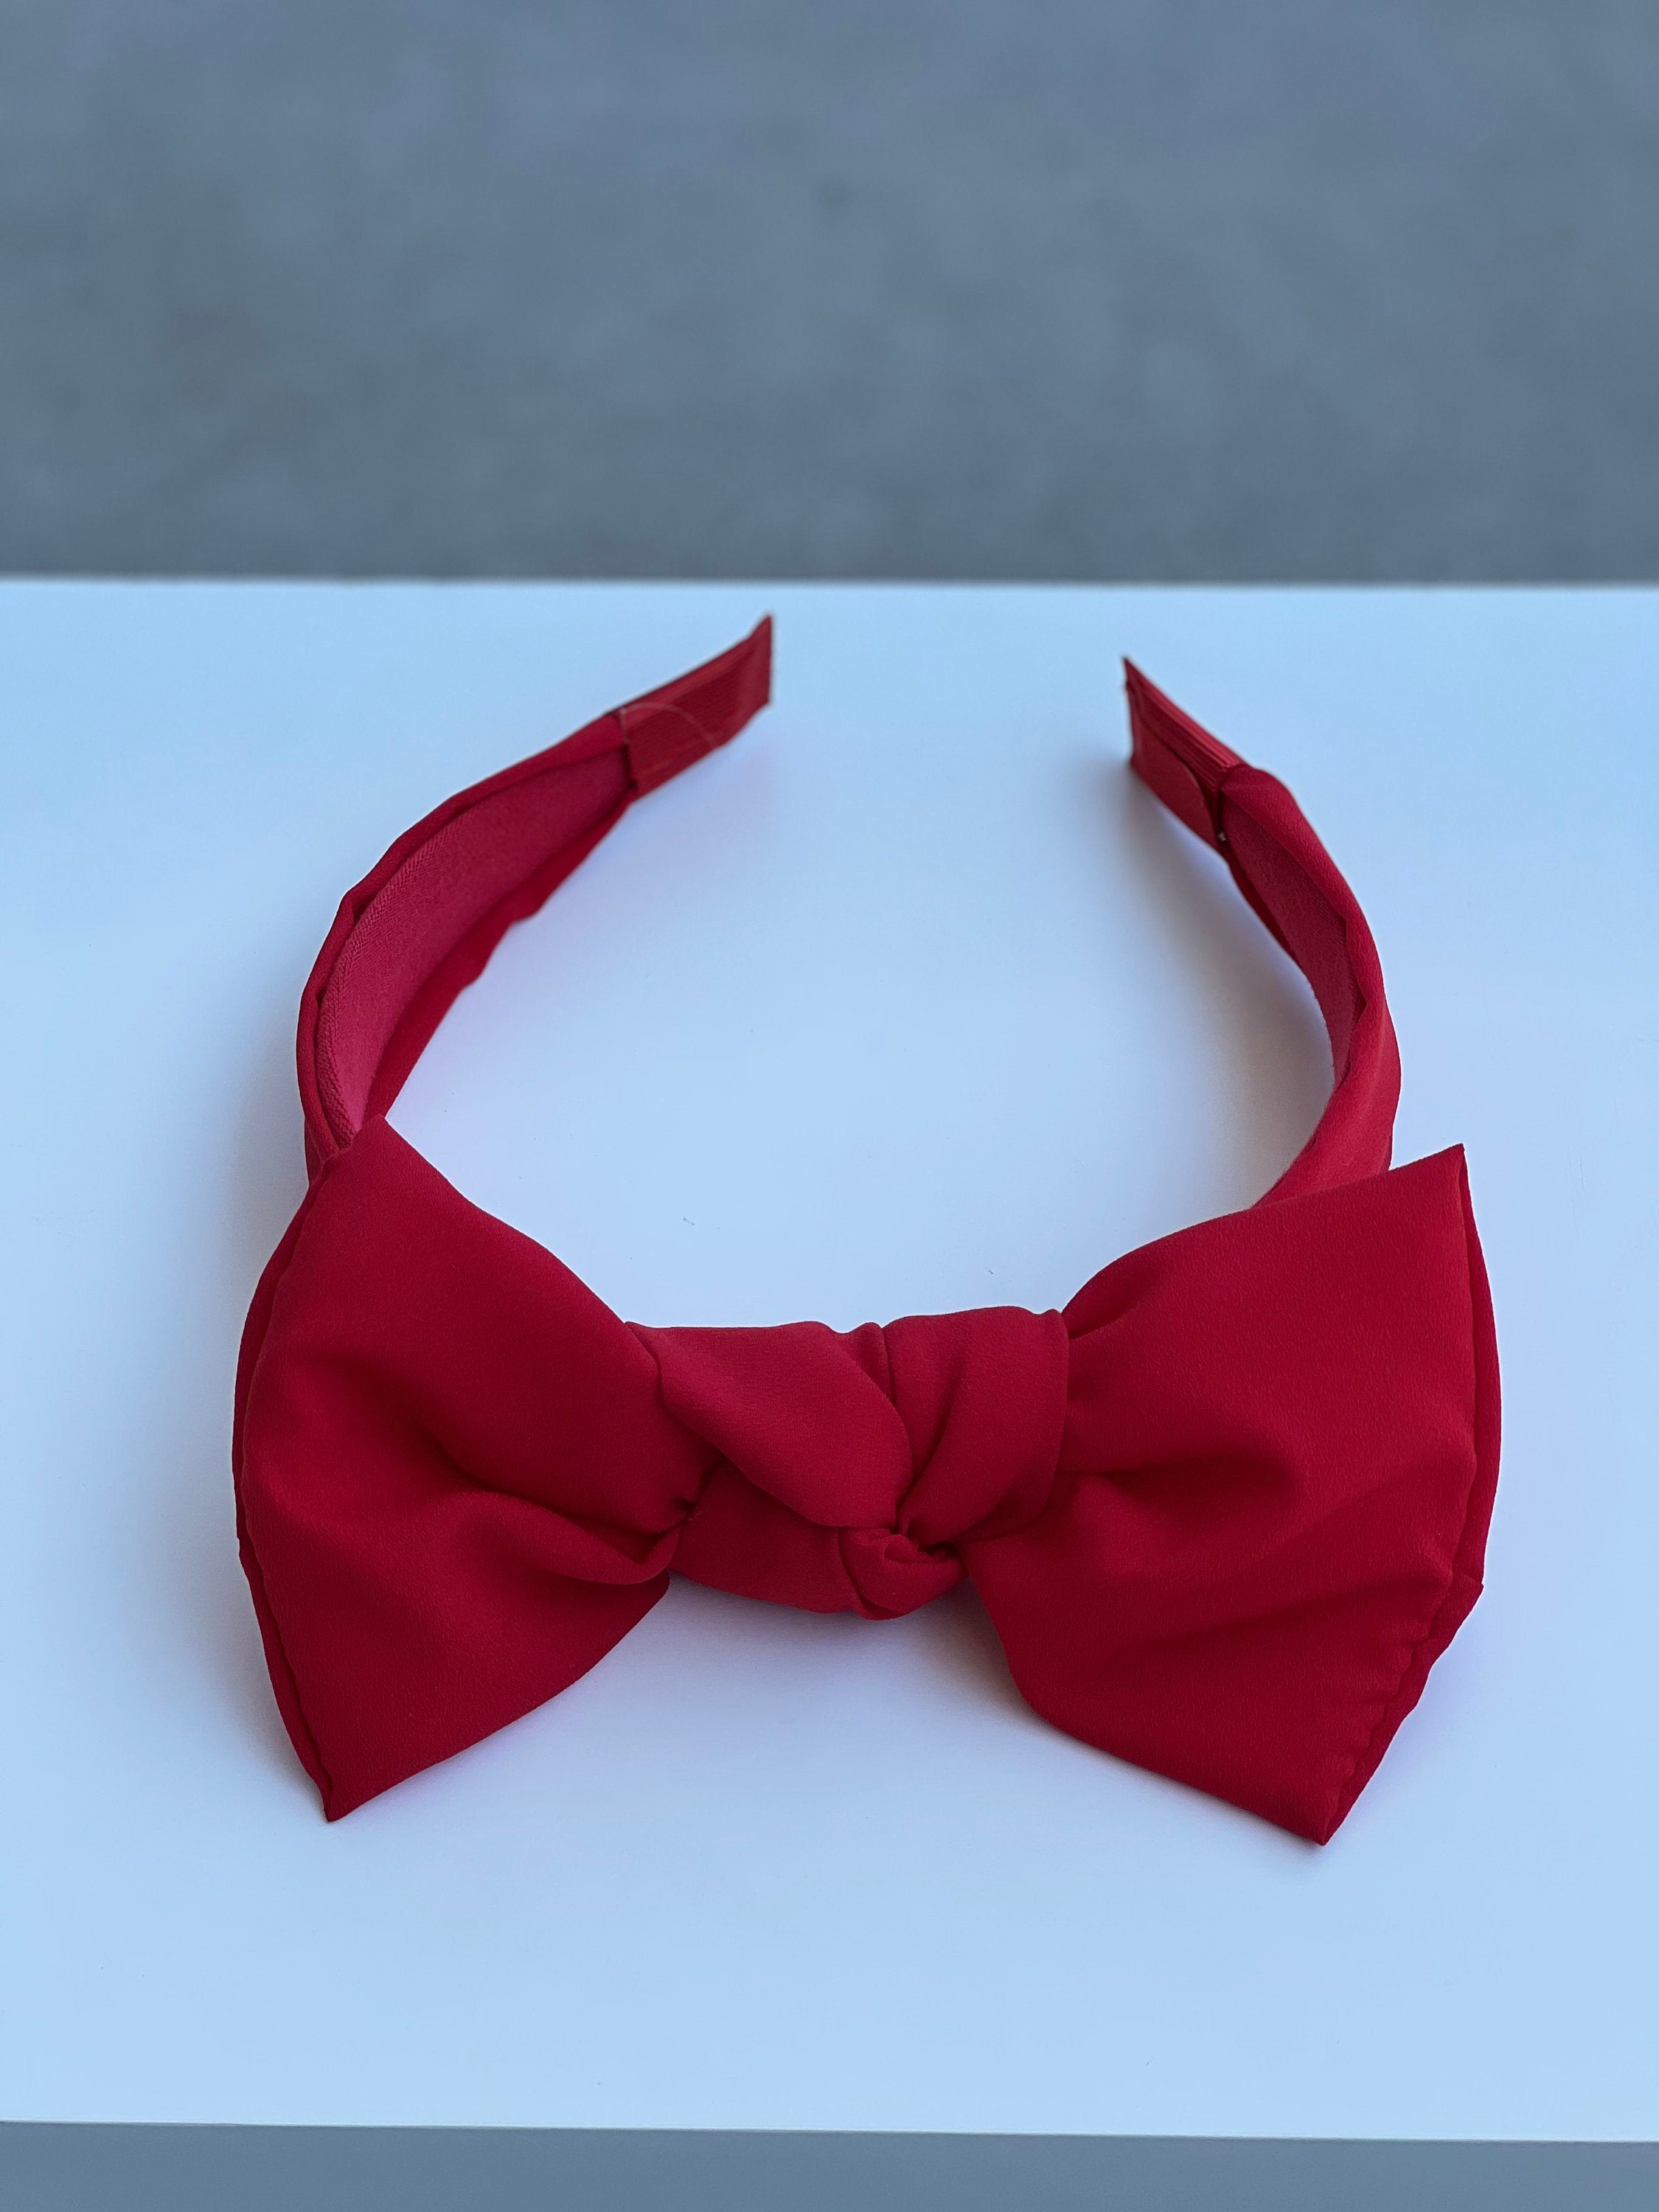 Stay comfortable and stylish with this classic red tie headband, made from soft red viscose crepe.